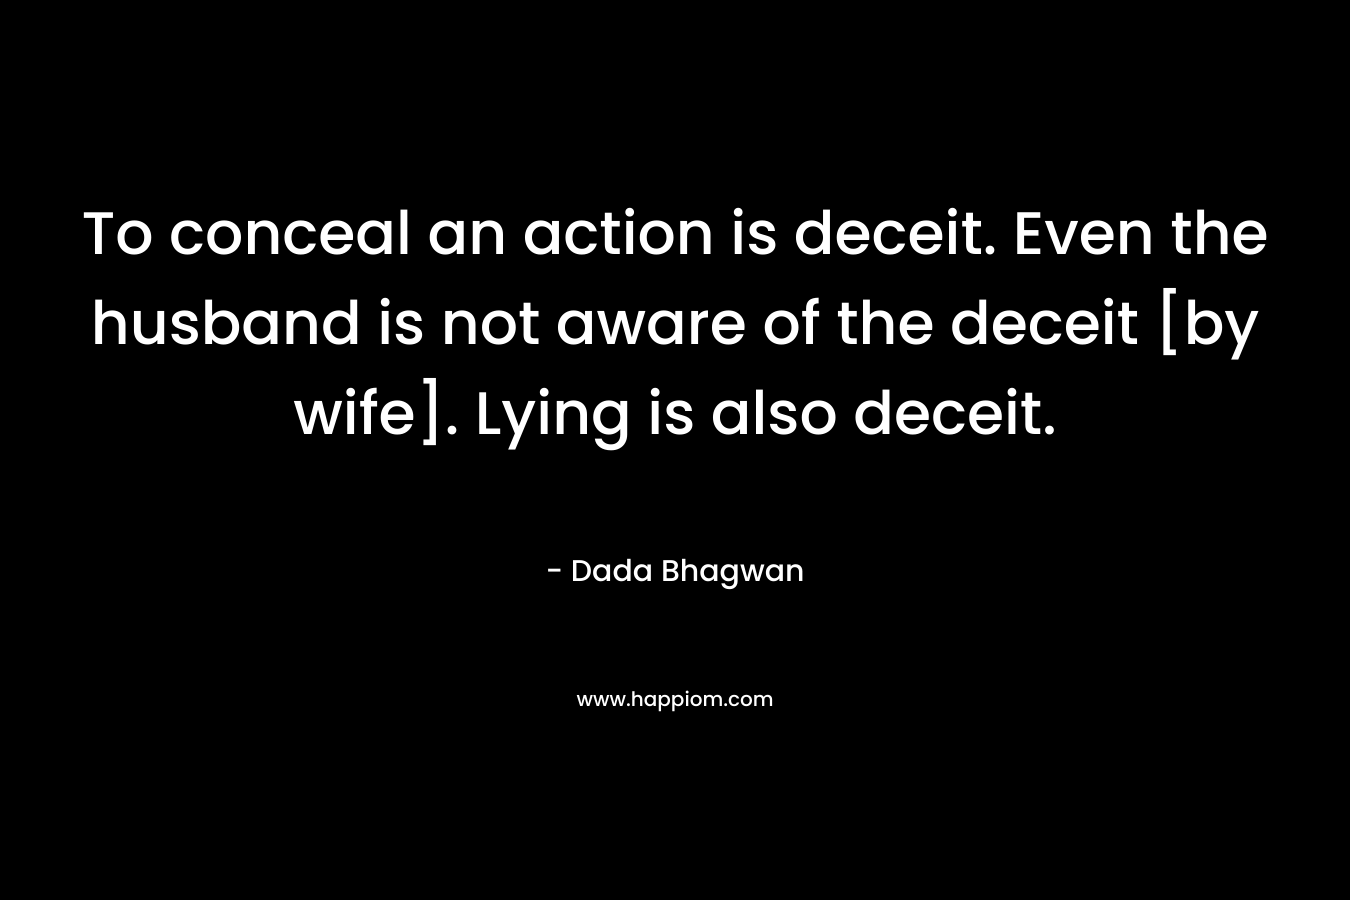 To conceal an action is deceit. Even the husband is not aware of the deceit [by wife]. Lying is also deceit.